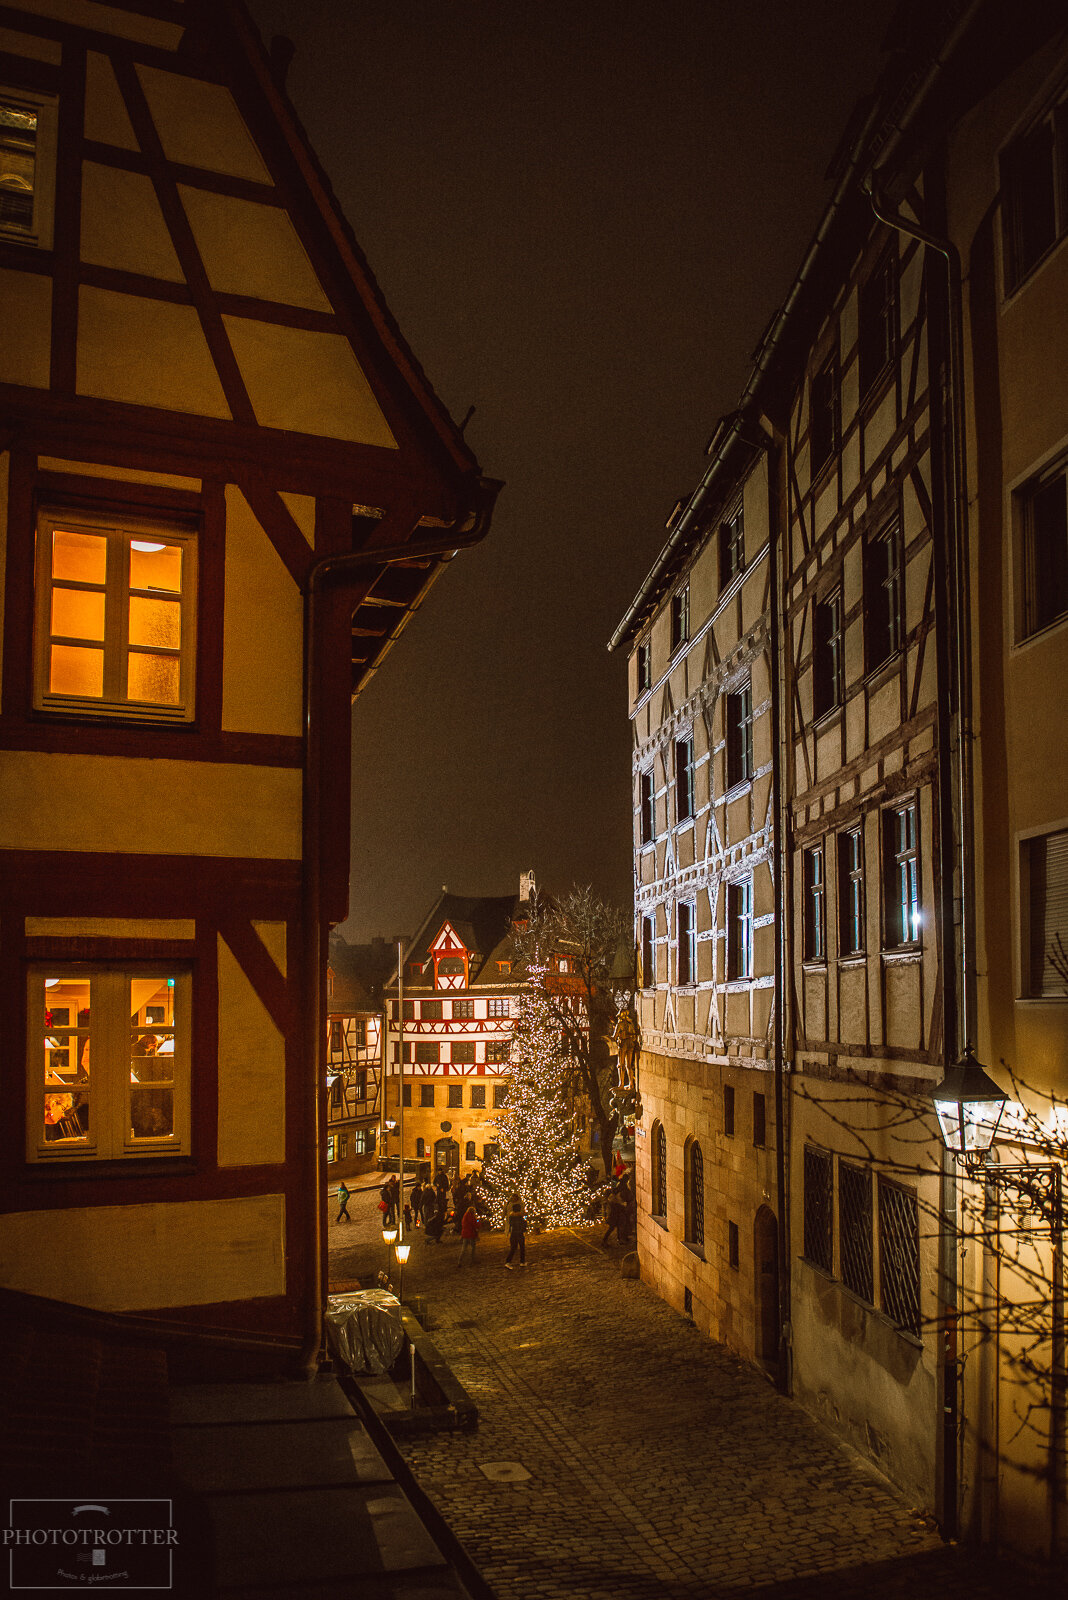   Read all about it on the blog:    Christmas in Germany: Nürnberg Christkindlesmarkt  